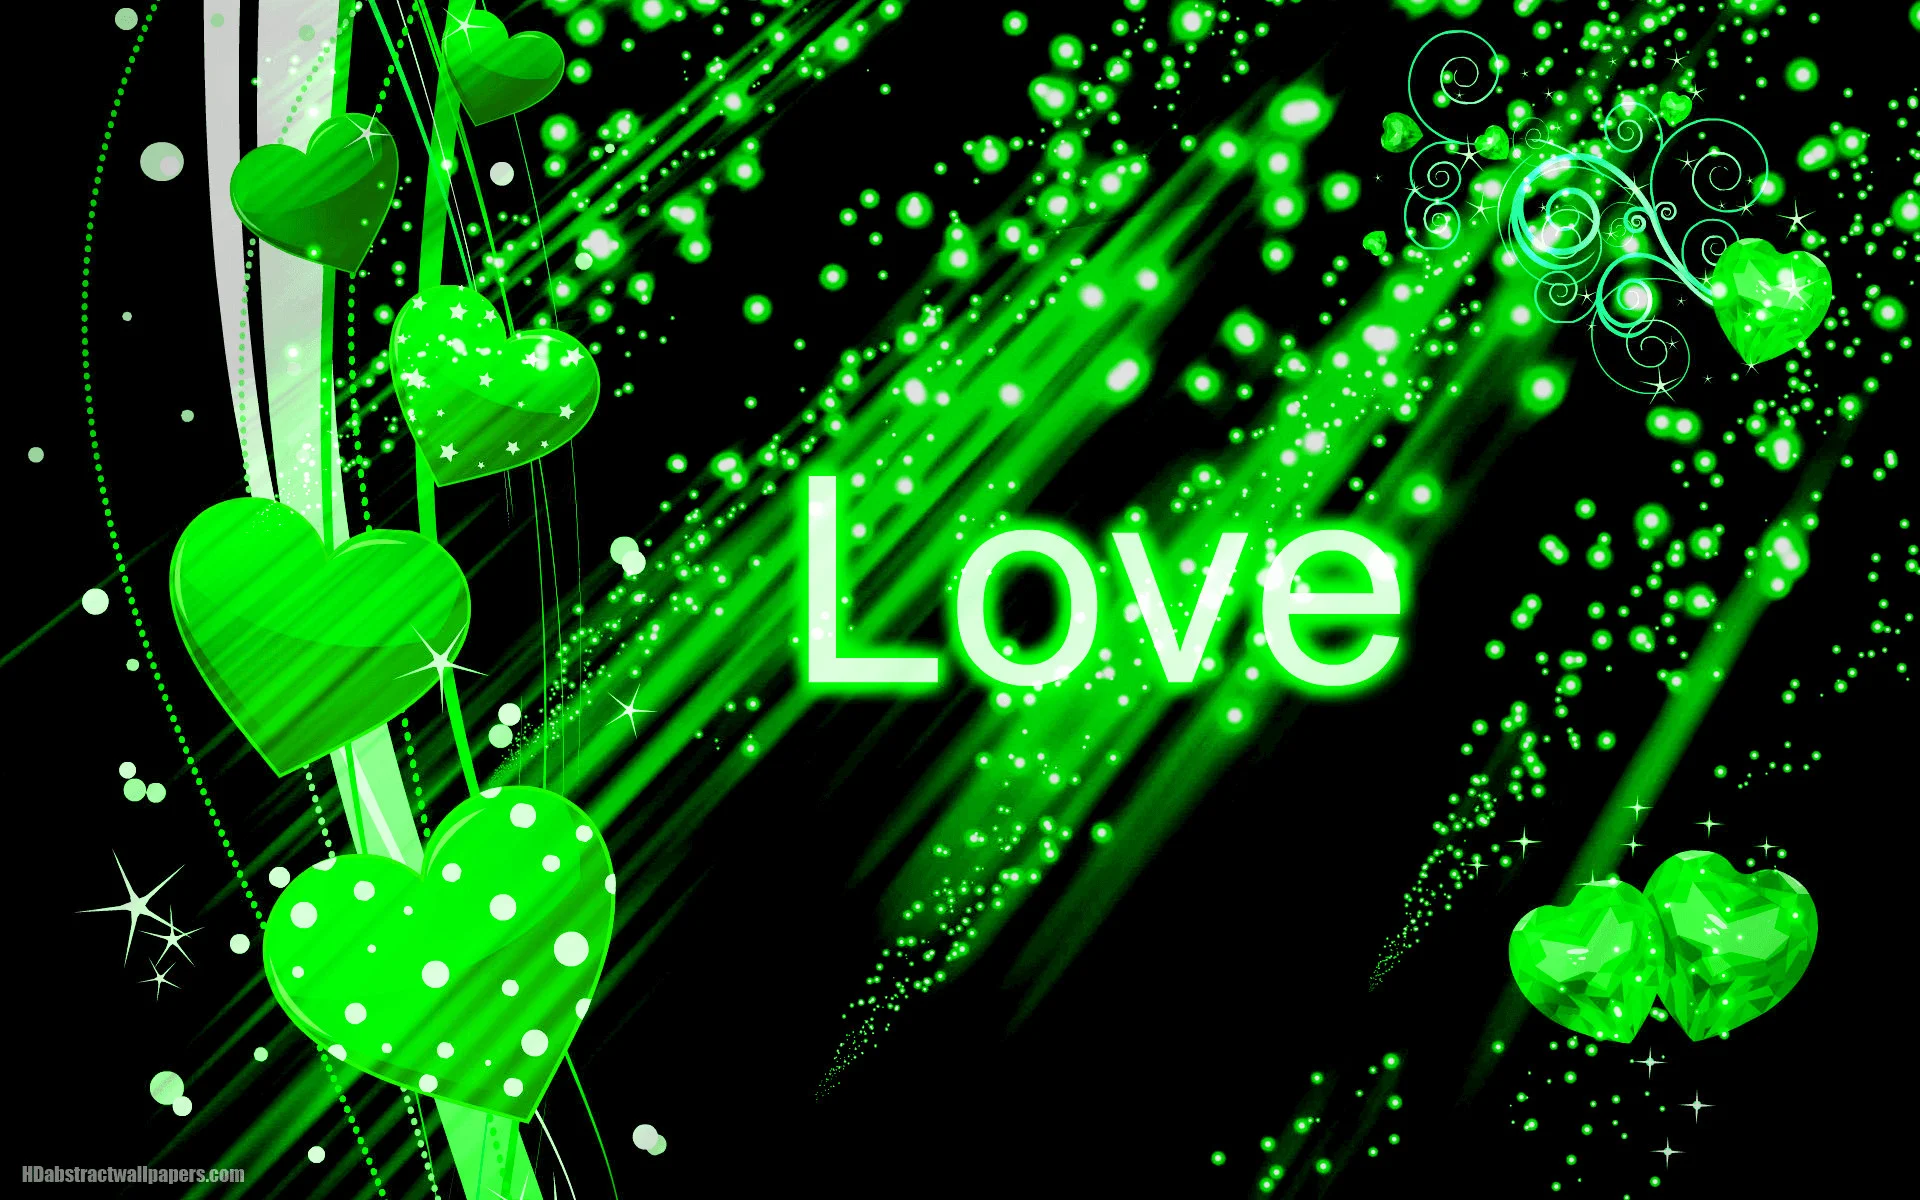 Beautiful black abstract wallpaper with green love hearts and the text love. Send this background to your boy or girlfriend, just to say that you are deeply